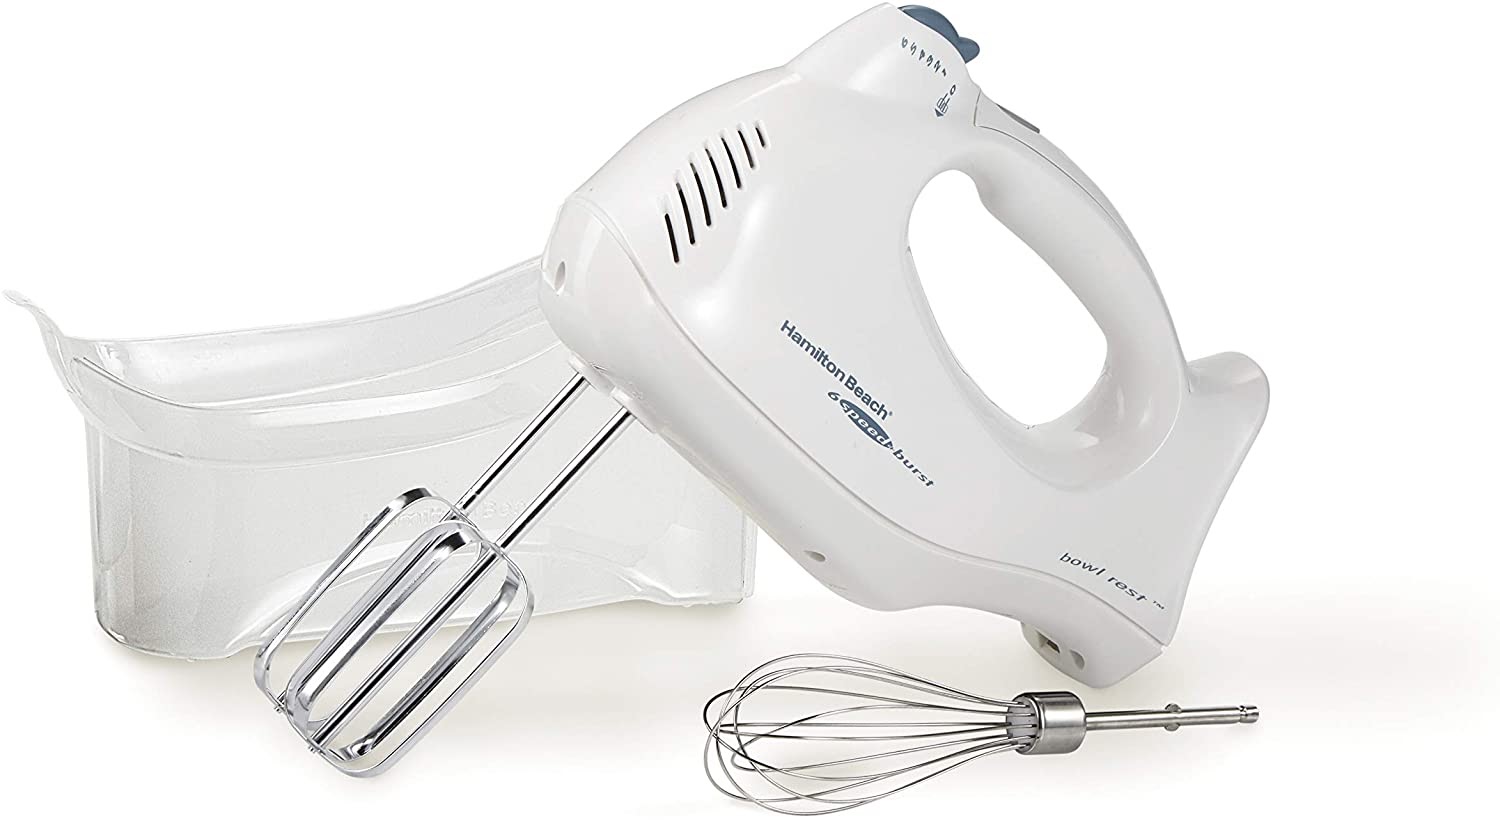 Hand mixer or hand beater